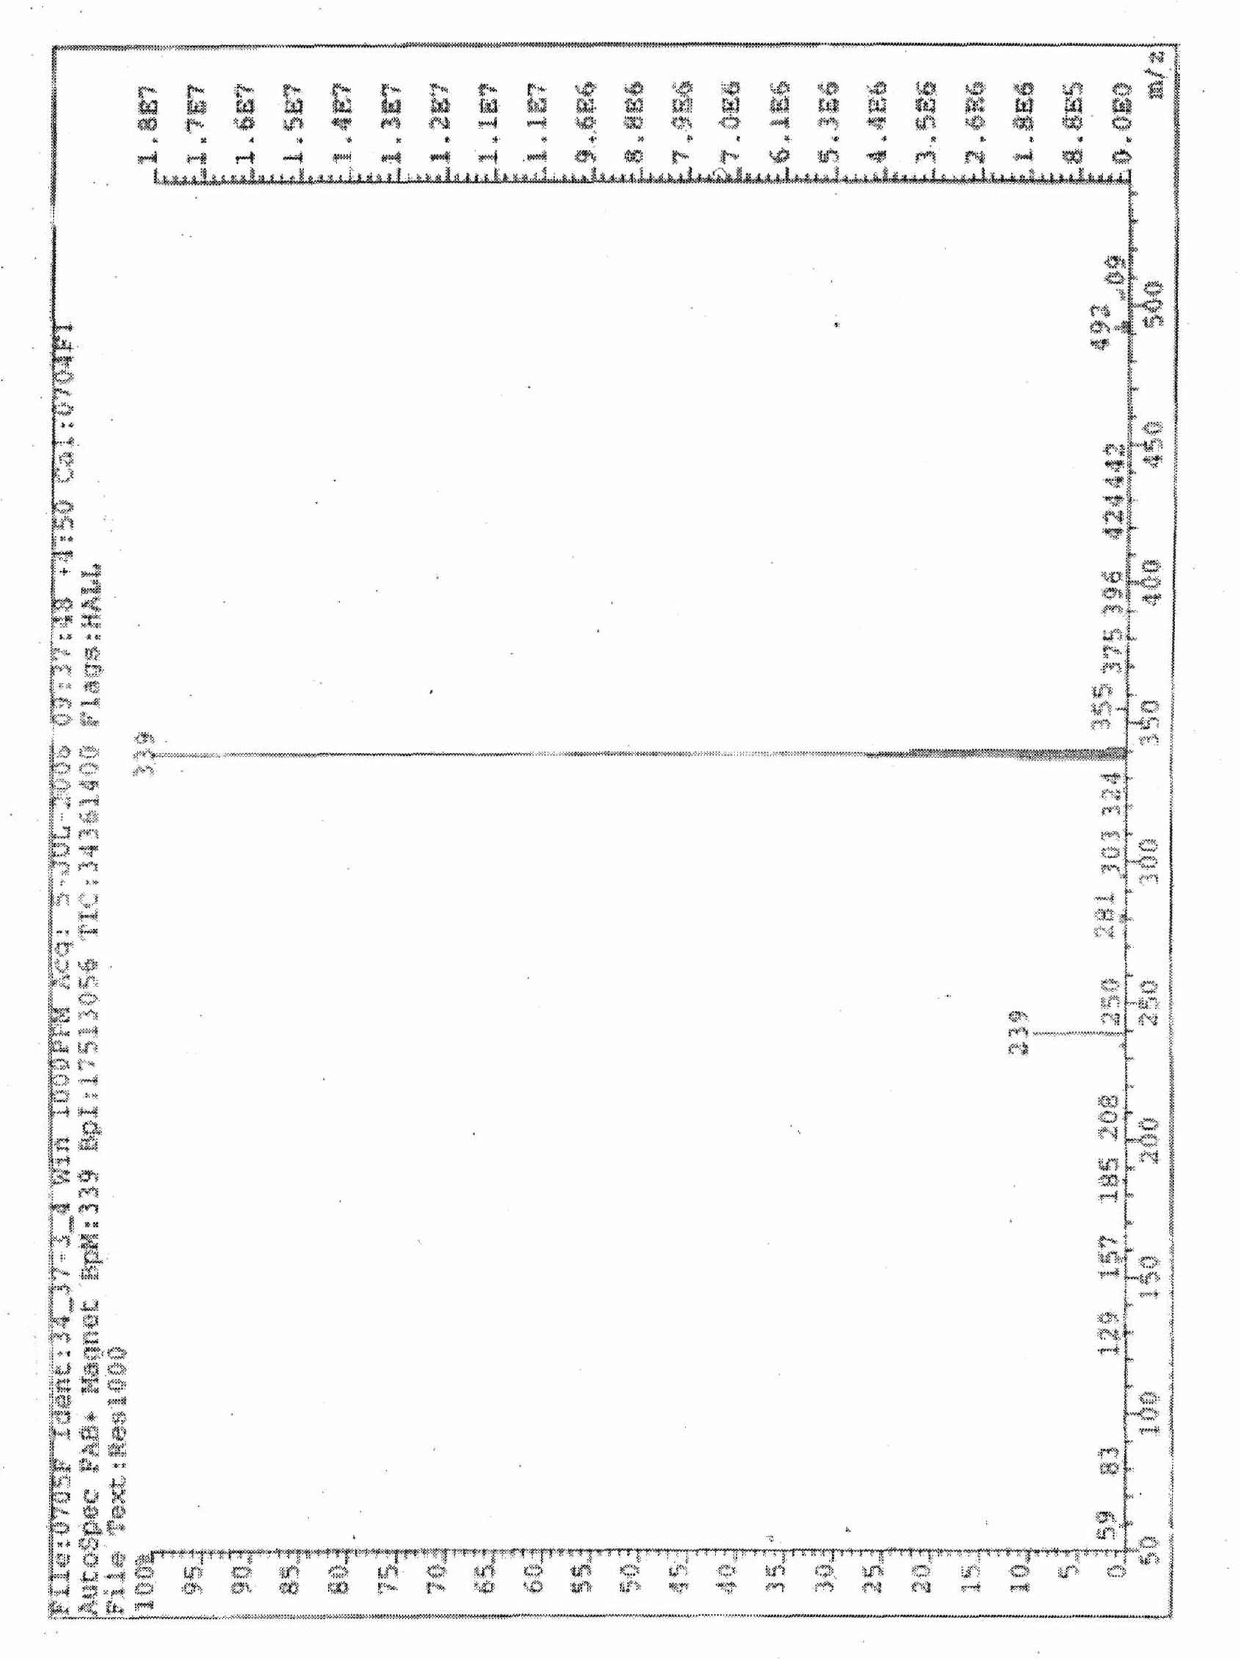 Picrinine reference substance in common alstonia leaf and preparation method thereof